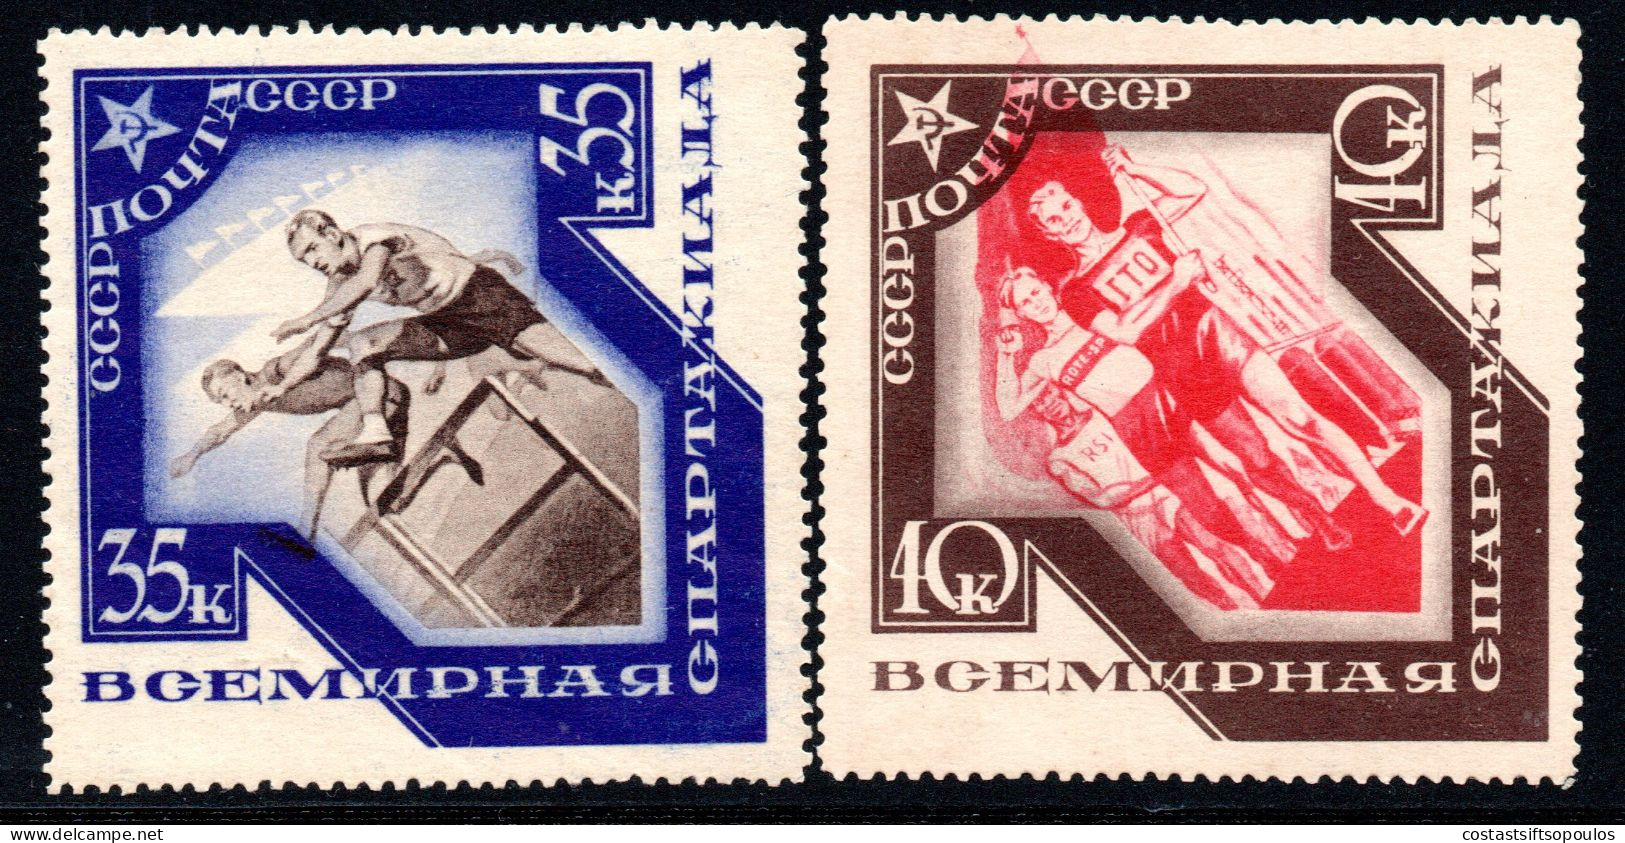 26-2.RUSSIA,1935 SPARTACIST GAMES,SC. 559-568 MNH,IT LOOKS POSSIBLY REGUMMED,9 SCANS,PLEASE SEE SCANS VERY CAREFULLY - Unused Stamps